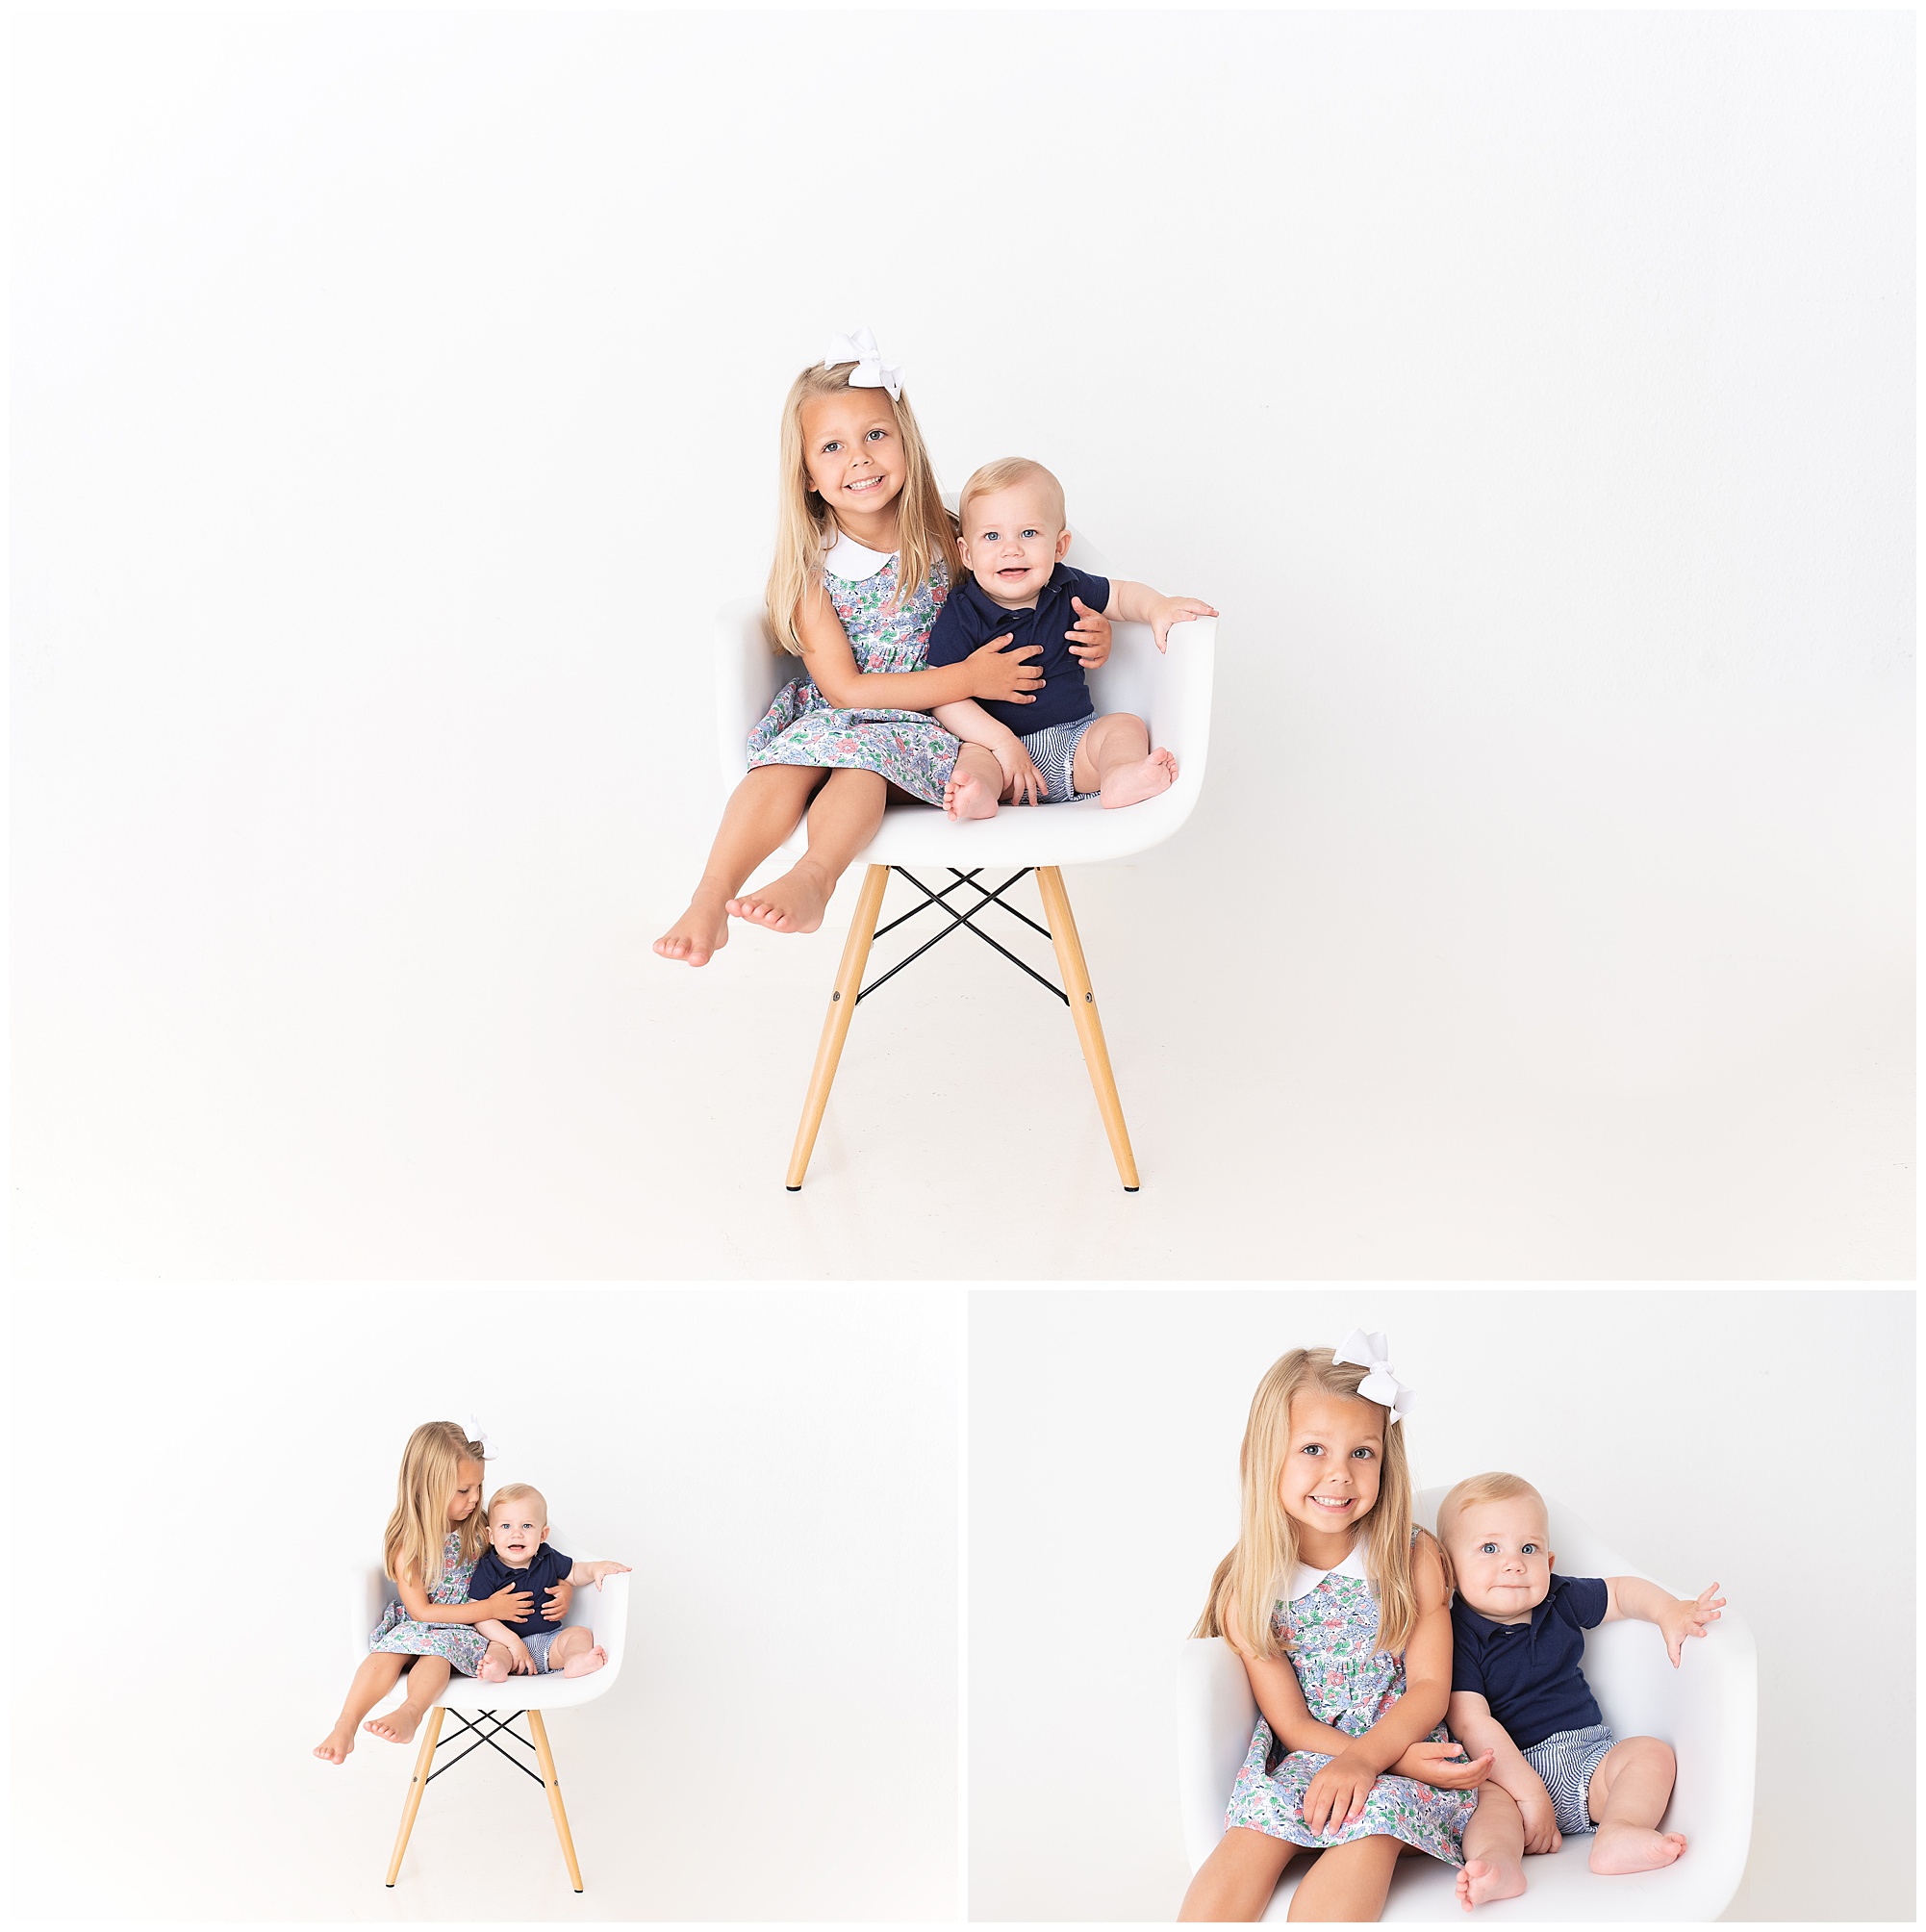 brother and sister loving on each other in the studio for photos